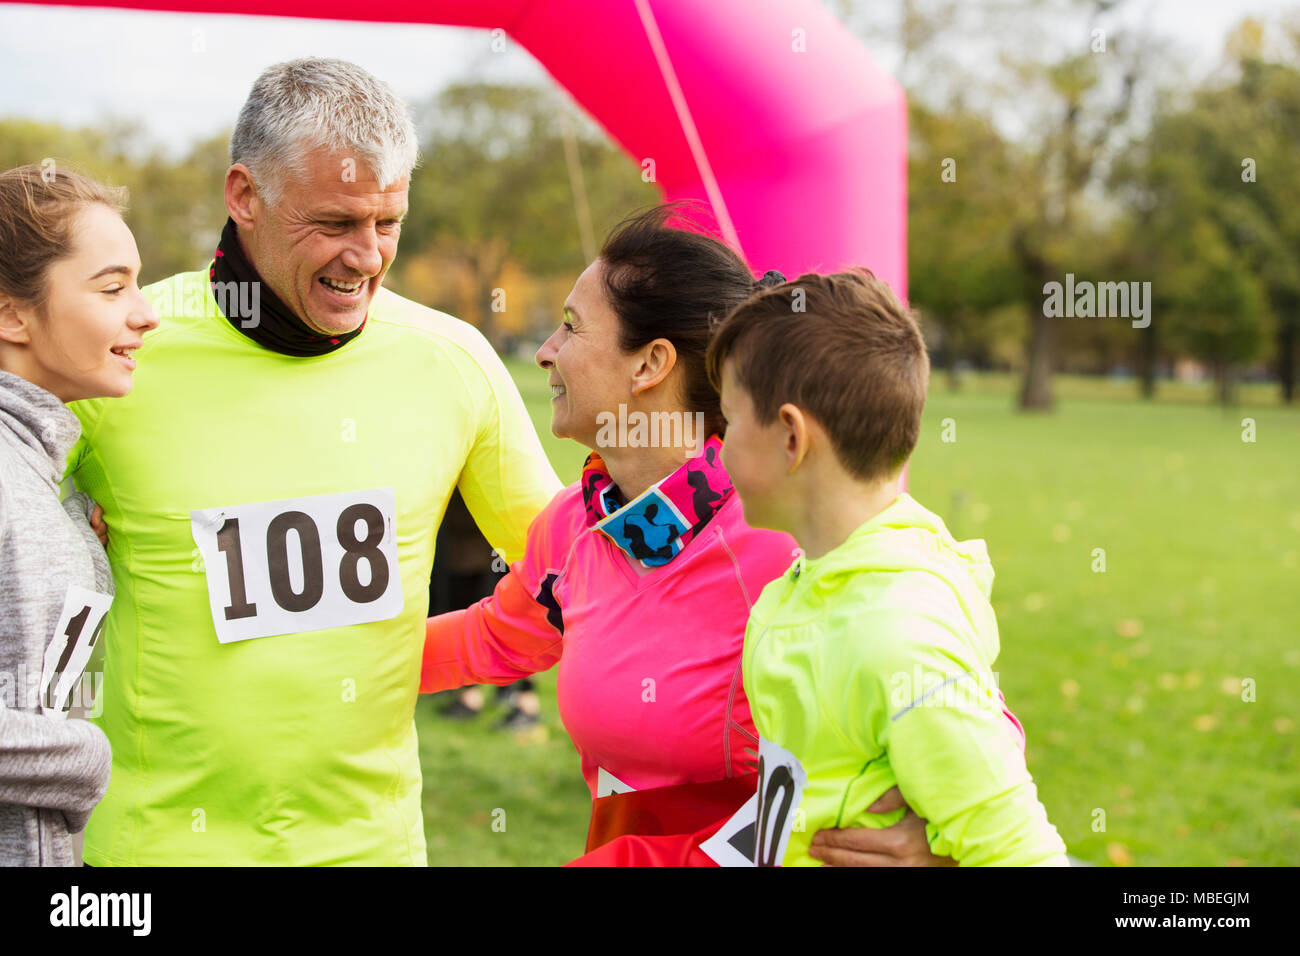 Happy family hugging at charity run in park Stock Photo